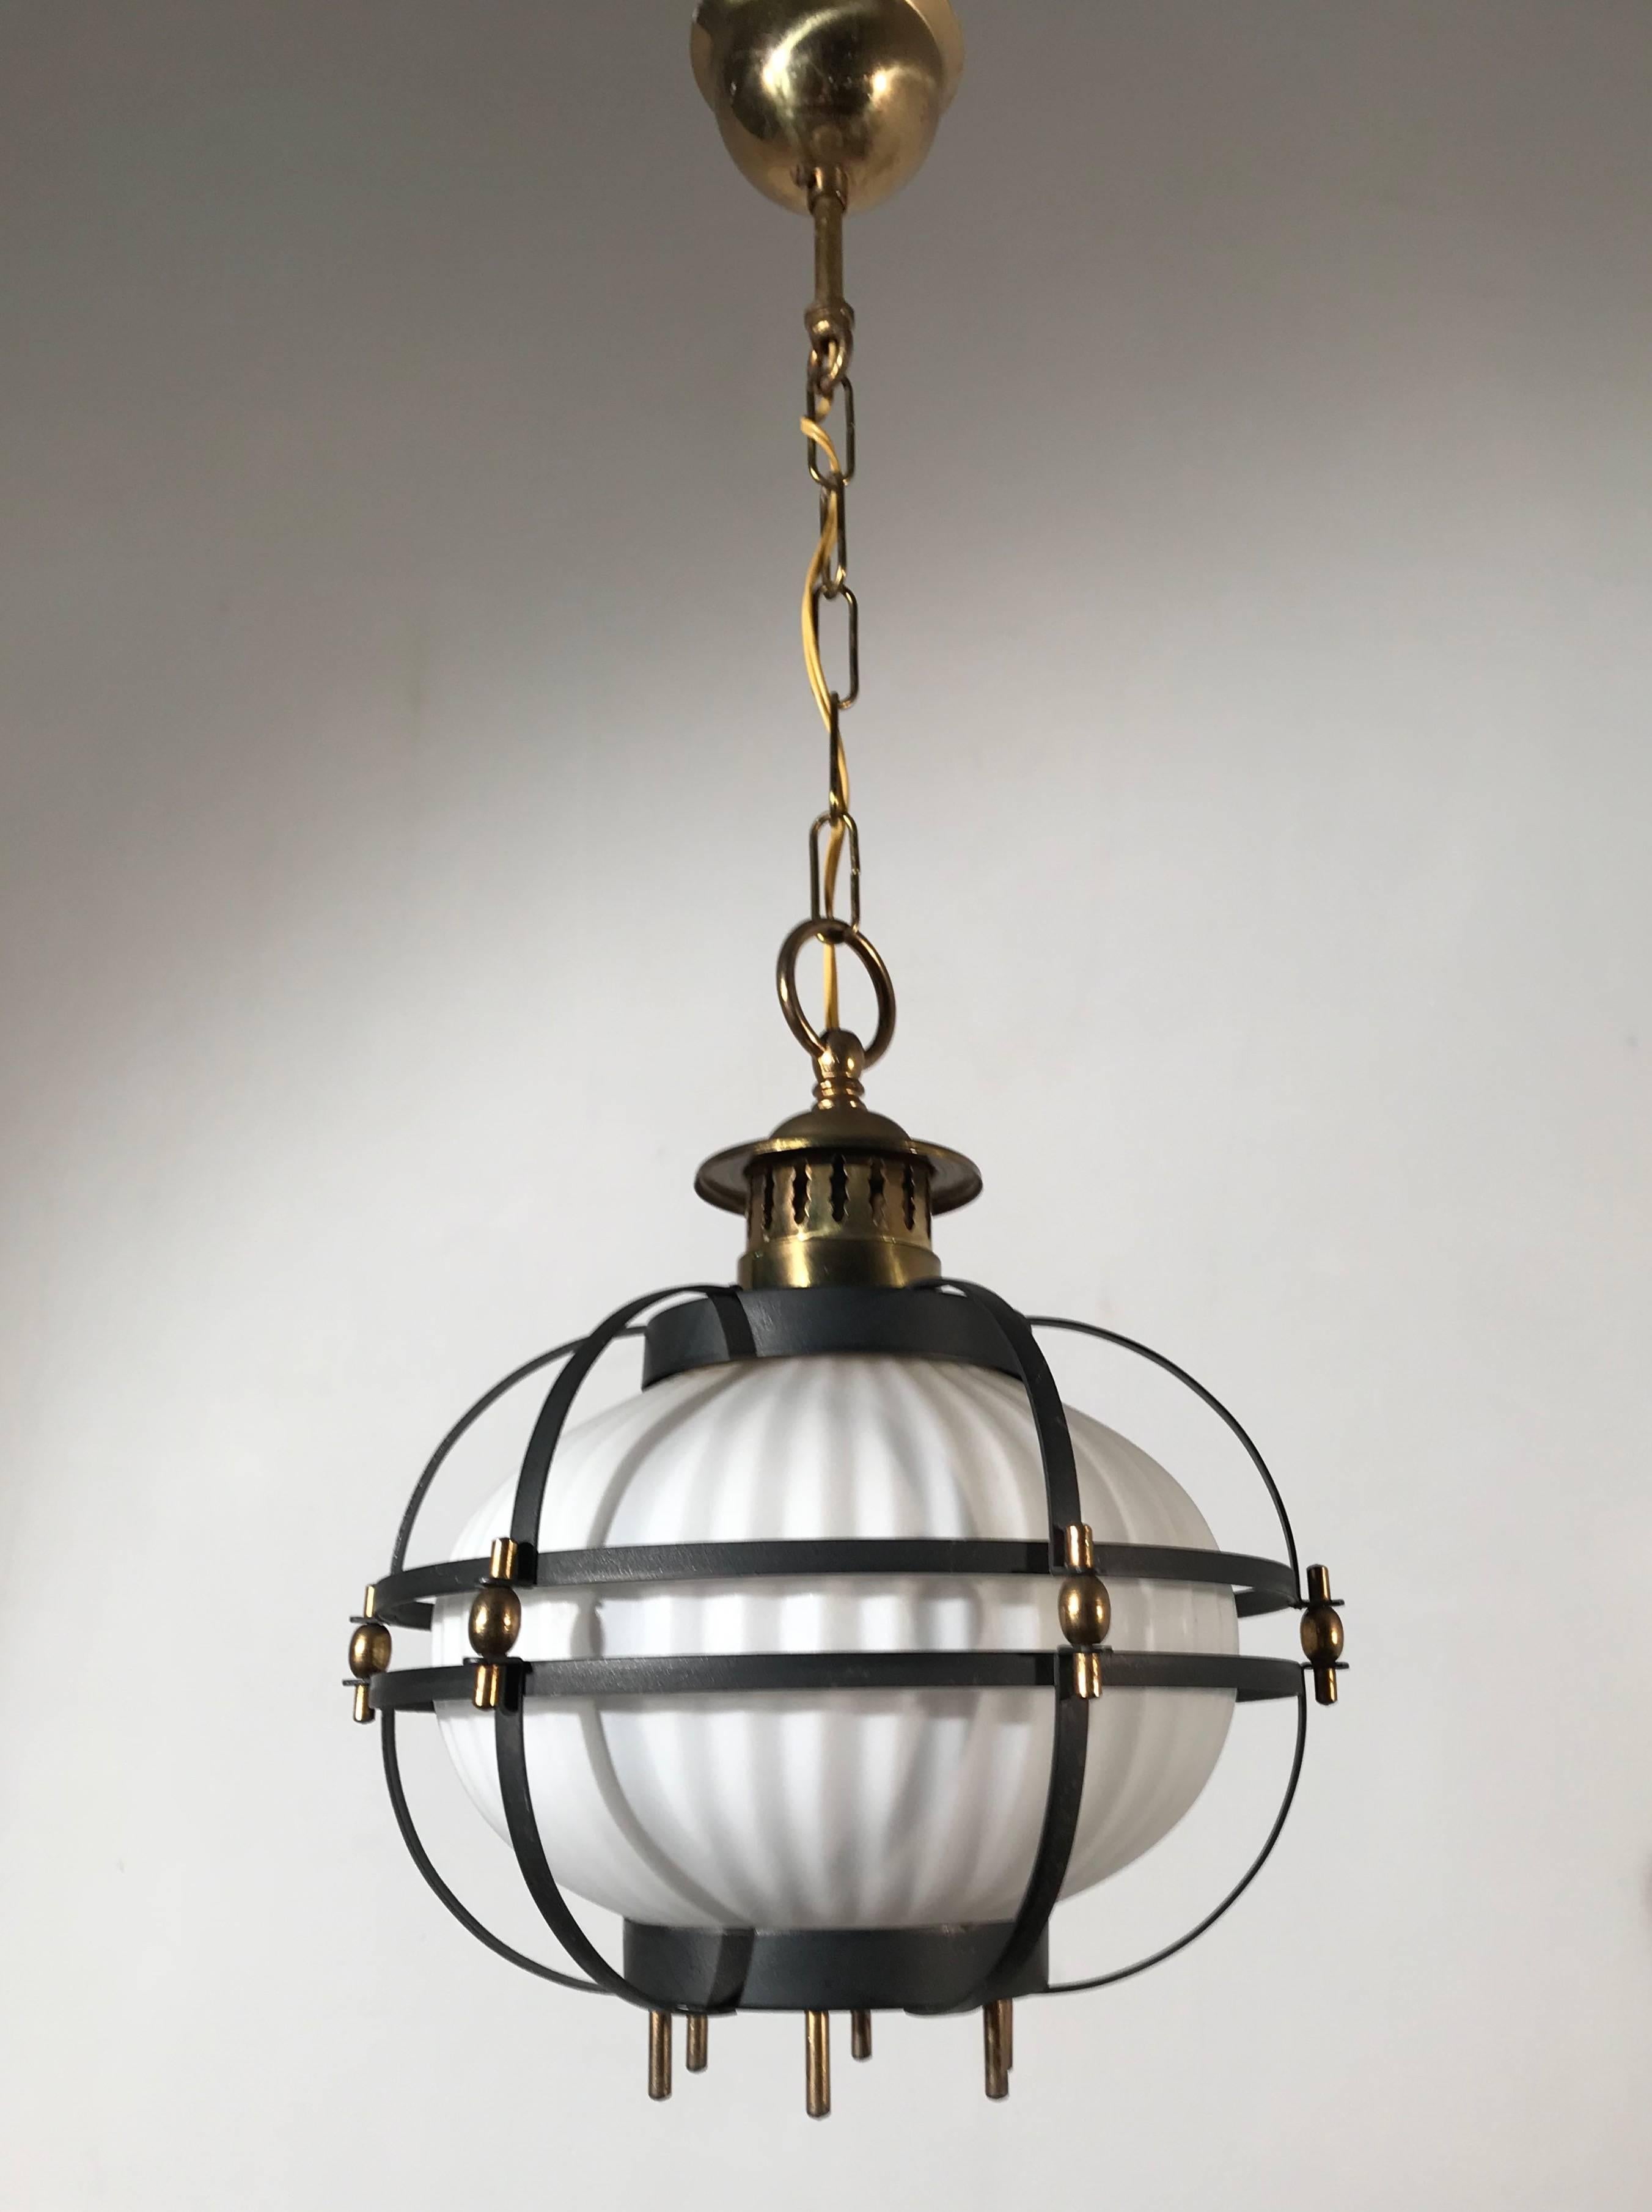 Stylized maritime pendant with a modern twist.

The basic design underneath this Mid-Century Modern light fixture is that of a ships lantern. The cage would protect both the sailors and the glass shade inside. The earliest ships lanterns were much